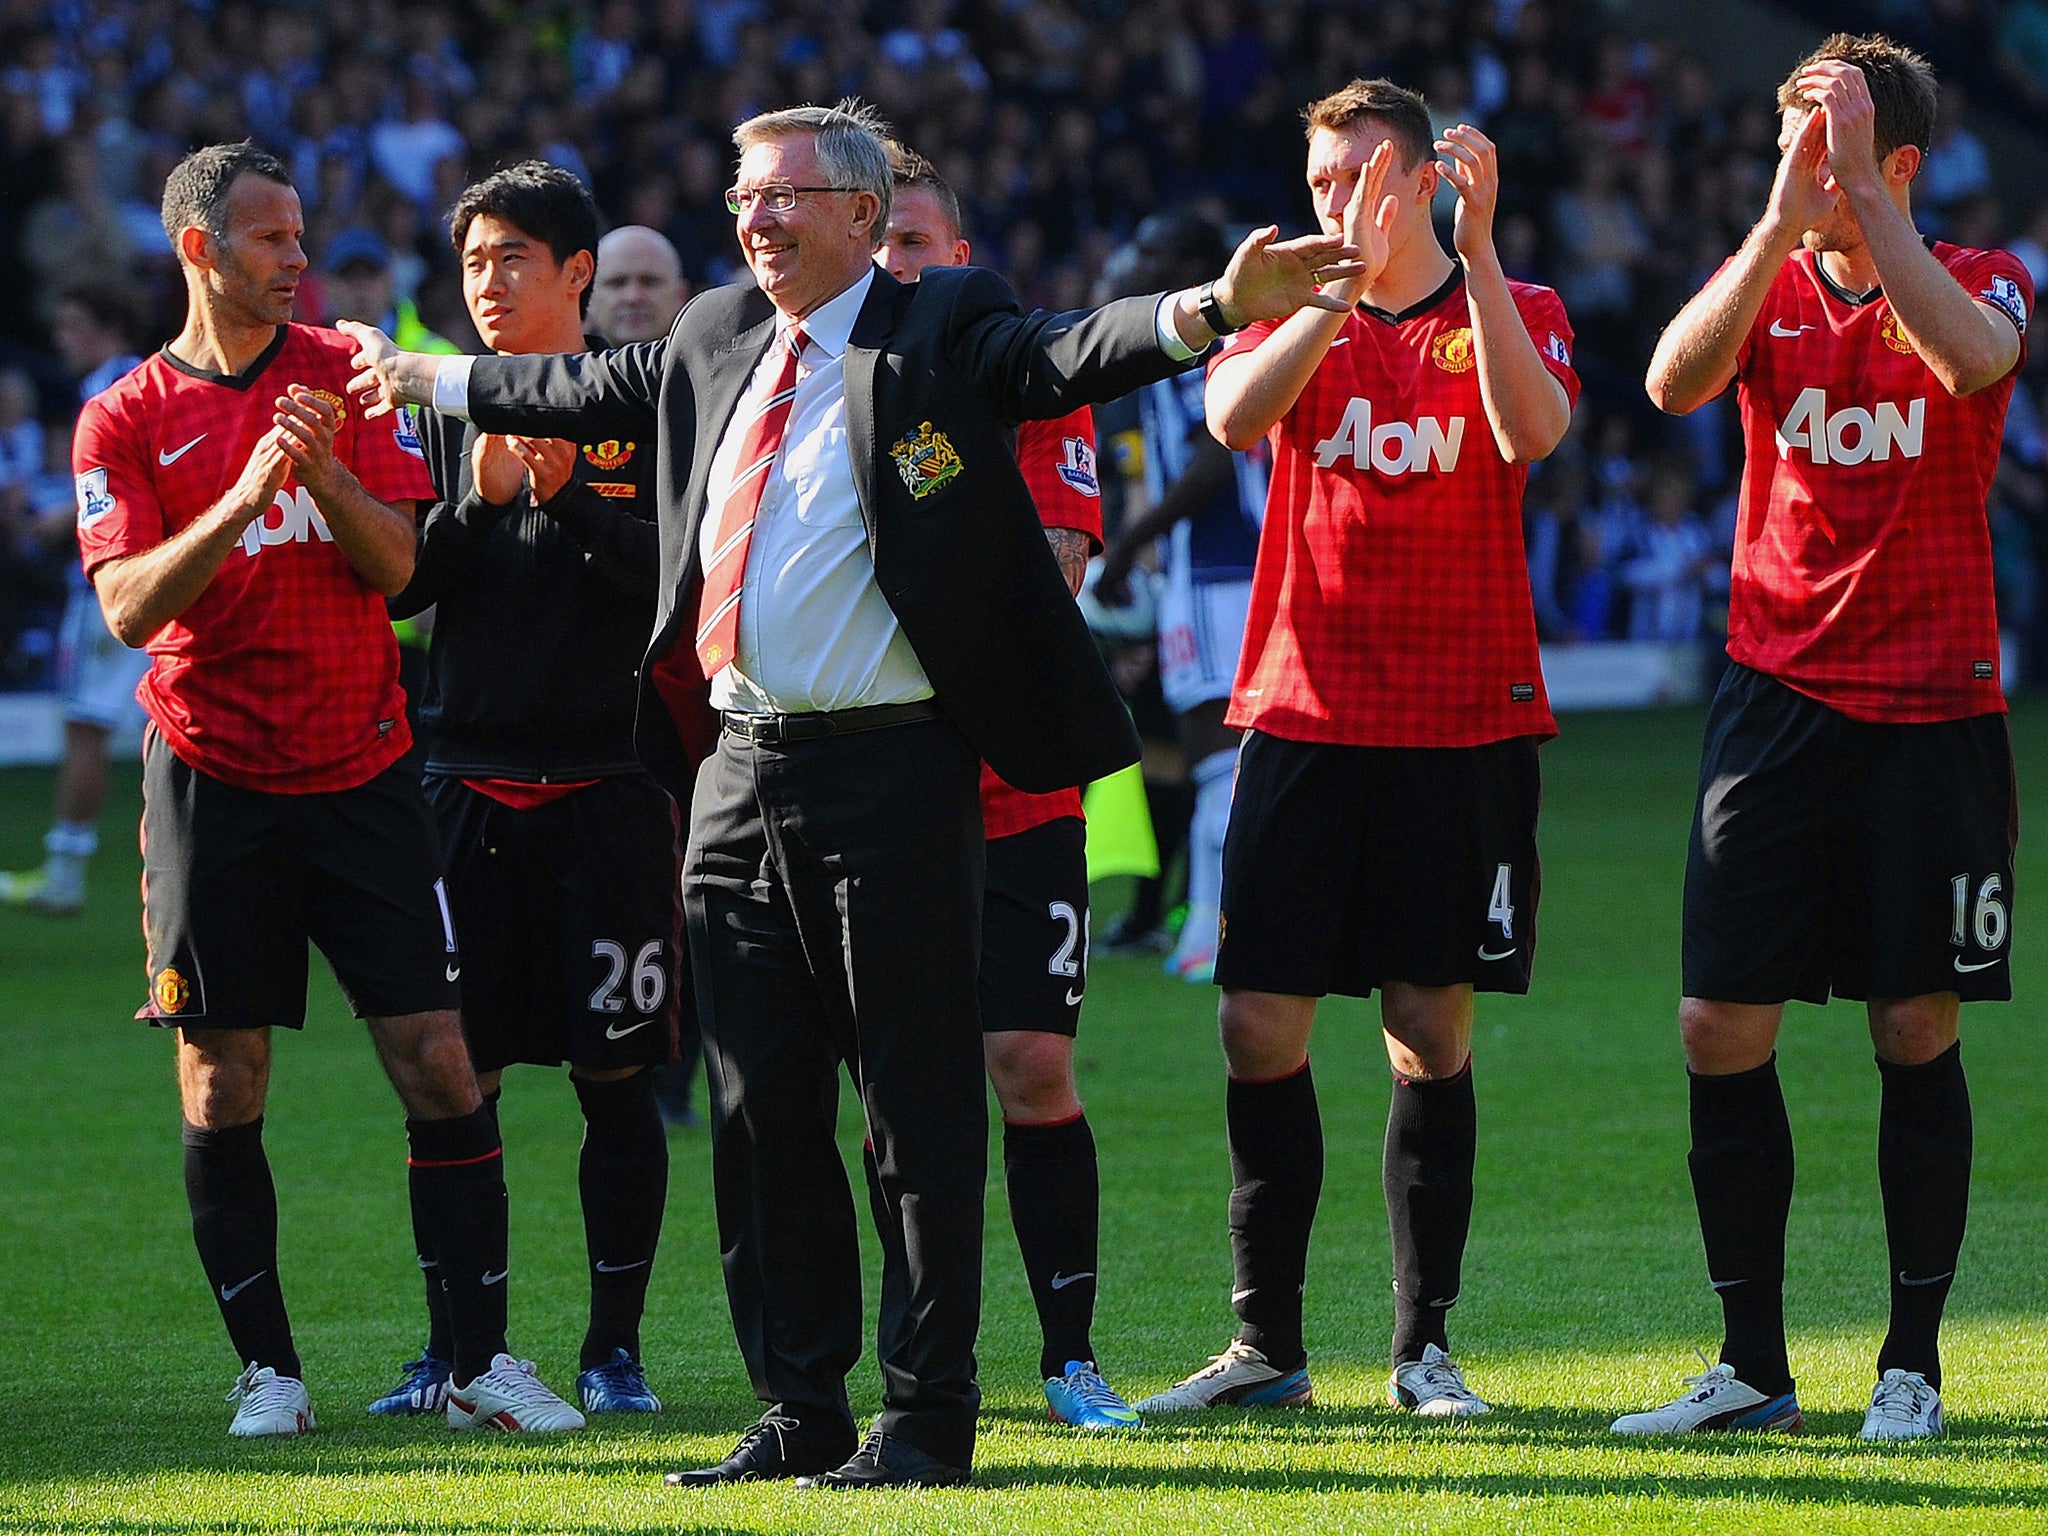 Sir Alex Ferguson says goodbye to the Manchester United support